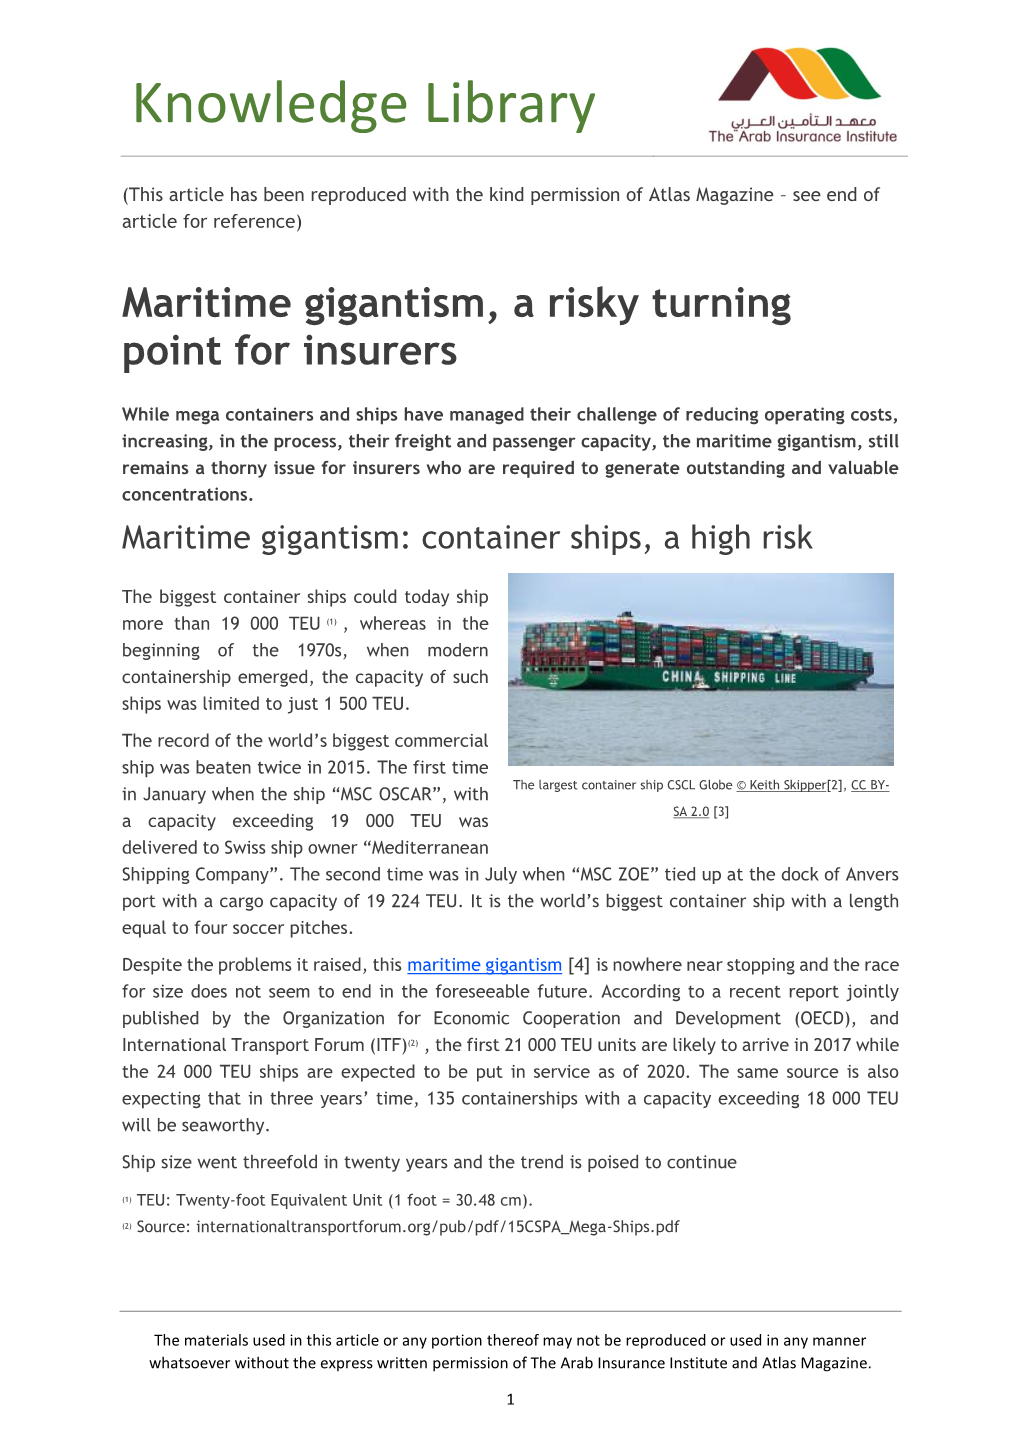 Maritime Gigantism, a Risky Turning Point for Insurers